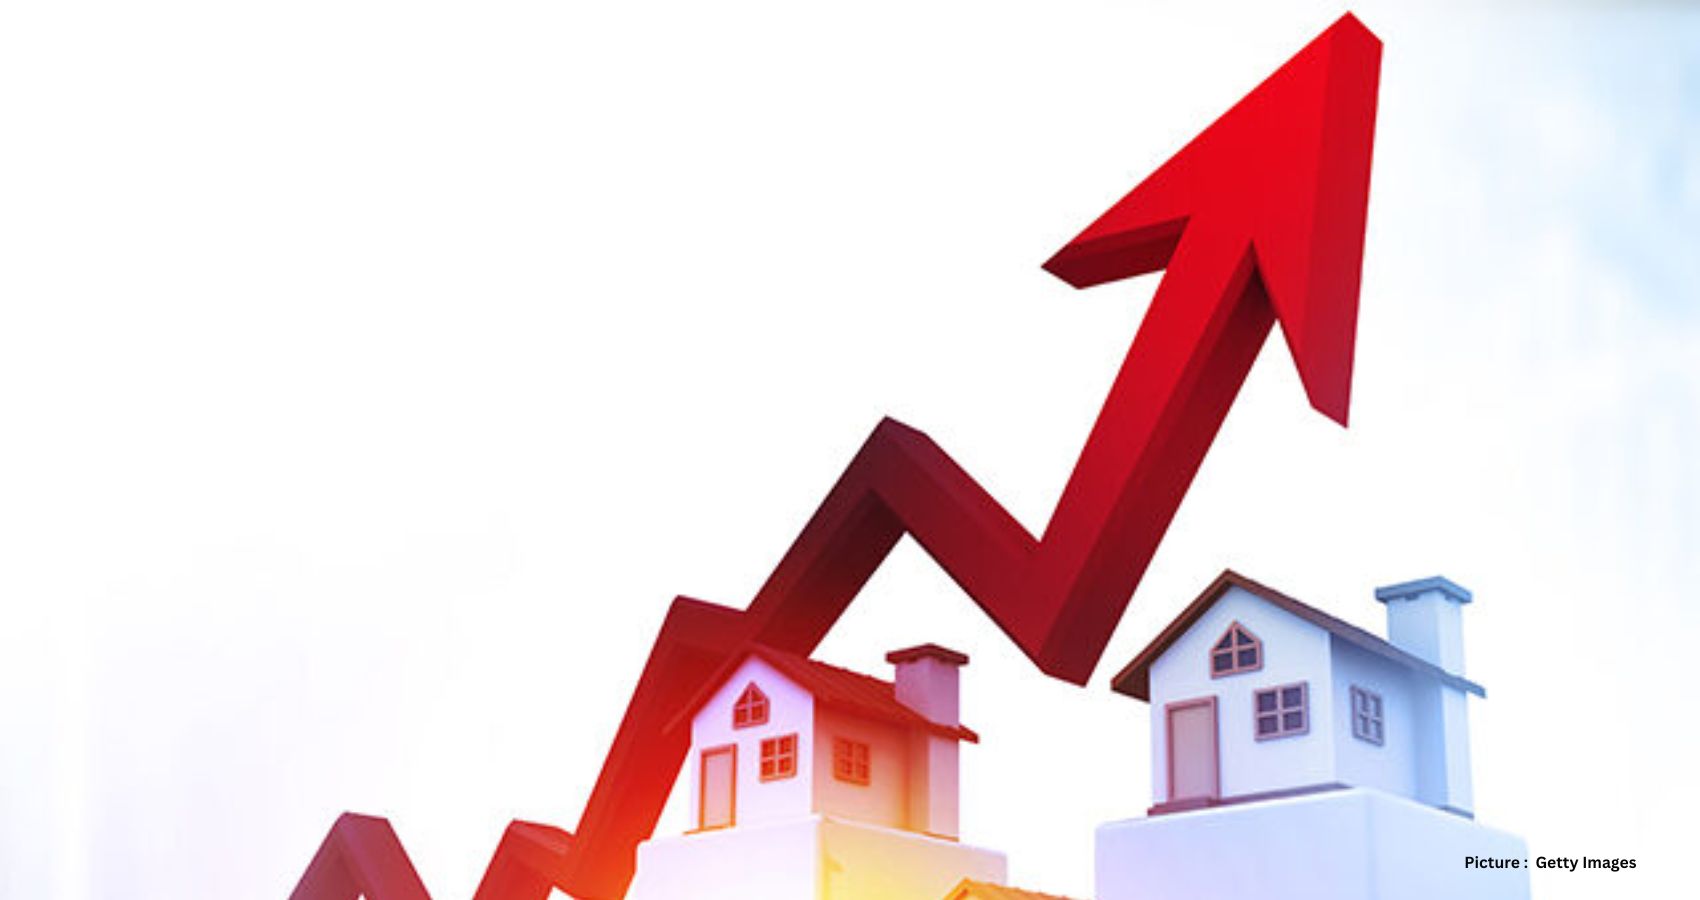 Featured & Cover Persistent Home Shortage Fuels Surging Prices Despite Record Mortgage Rates